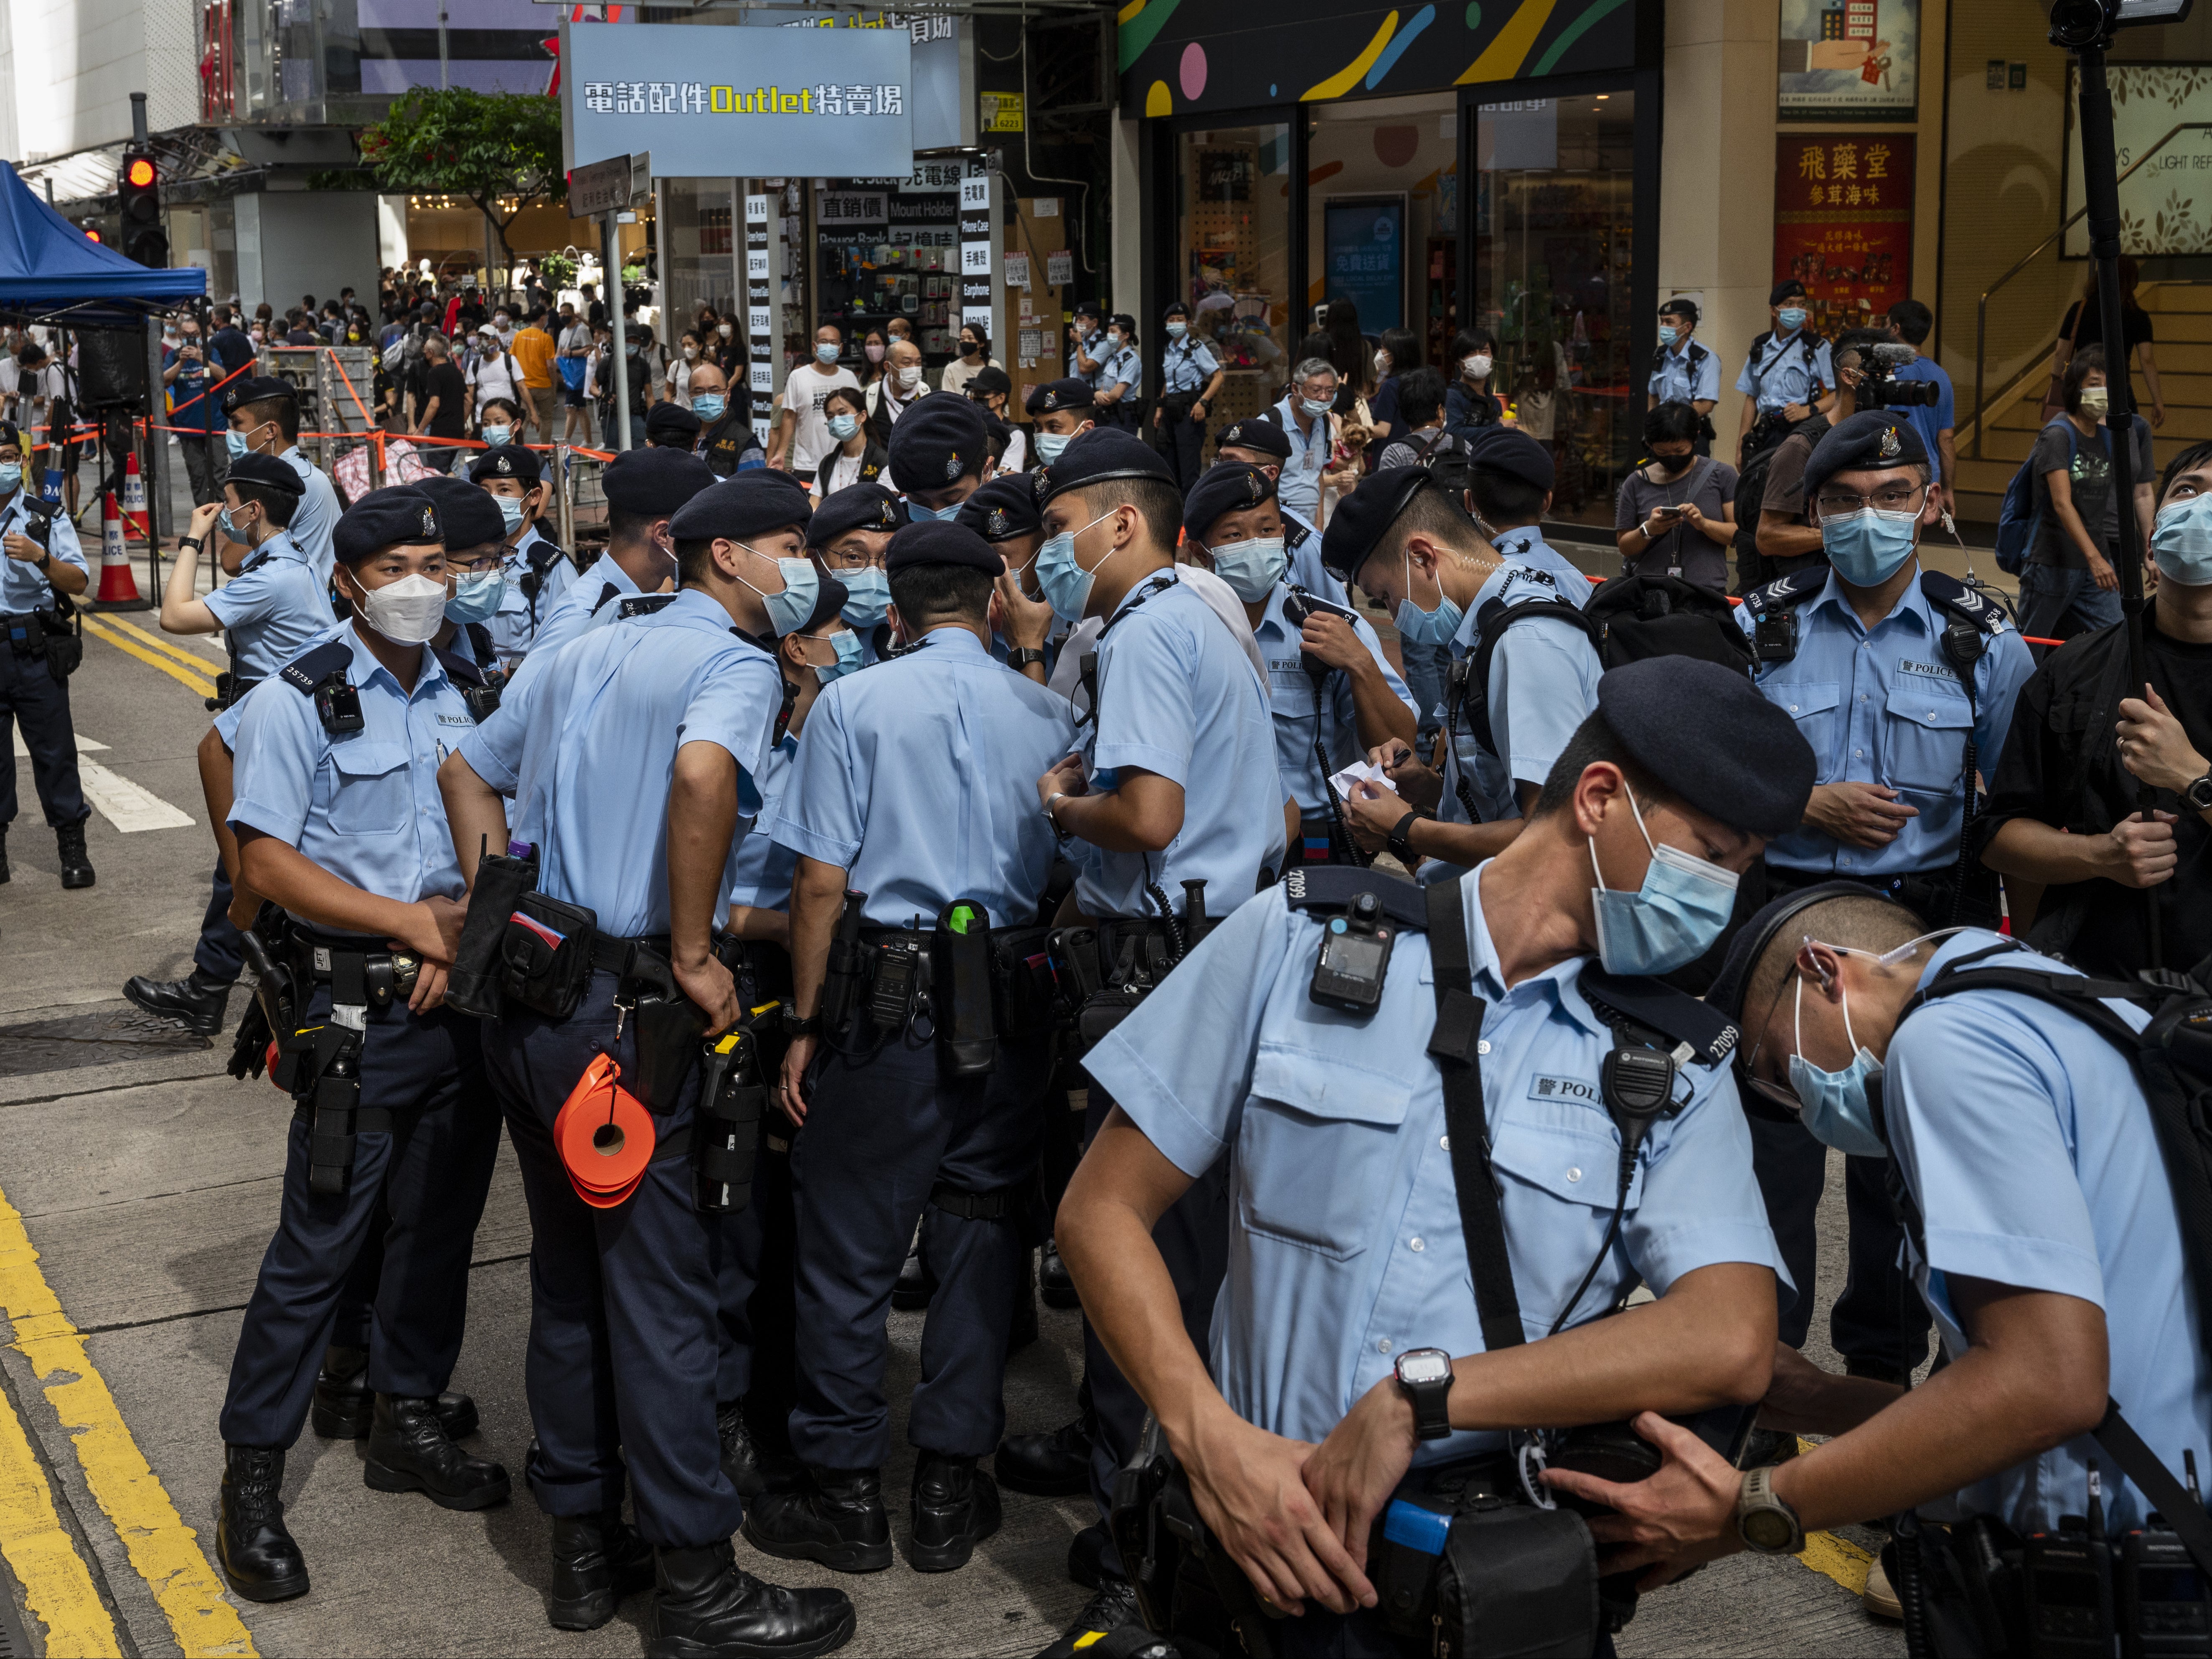 Police officers stand guard in Hong Kong on July 1, 2021